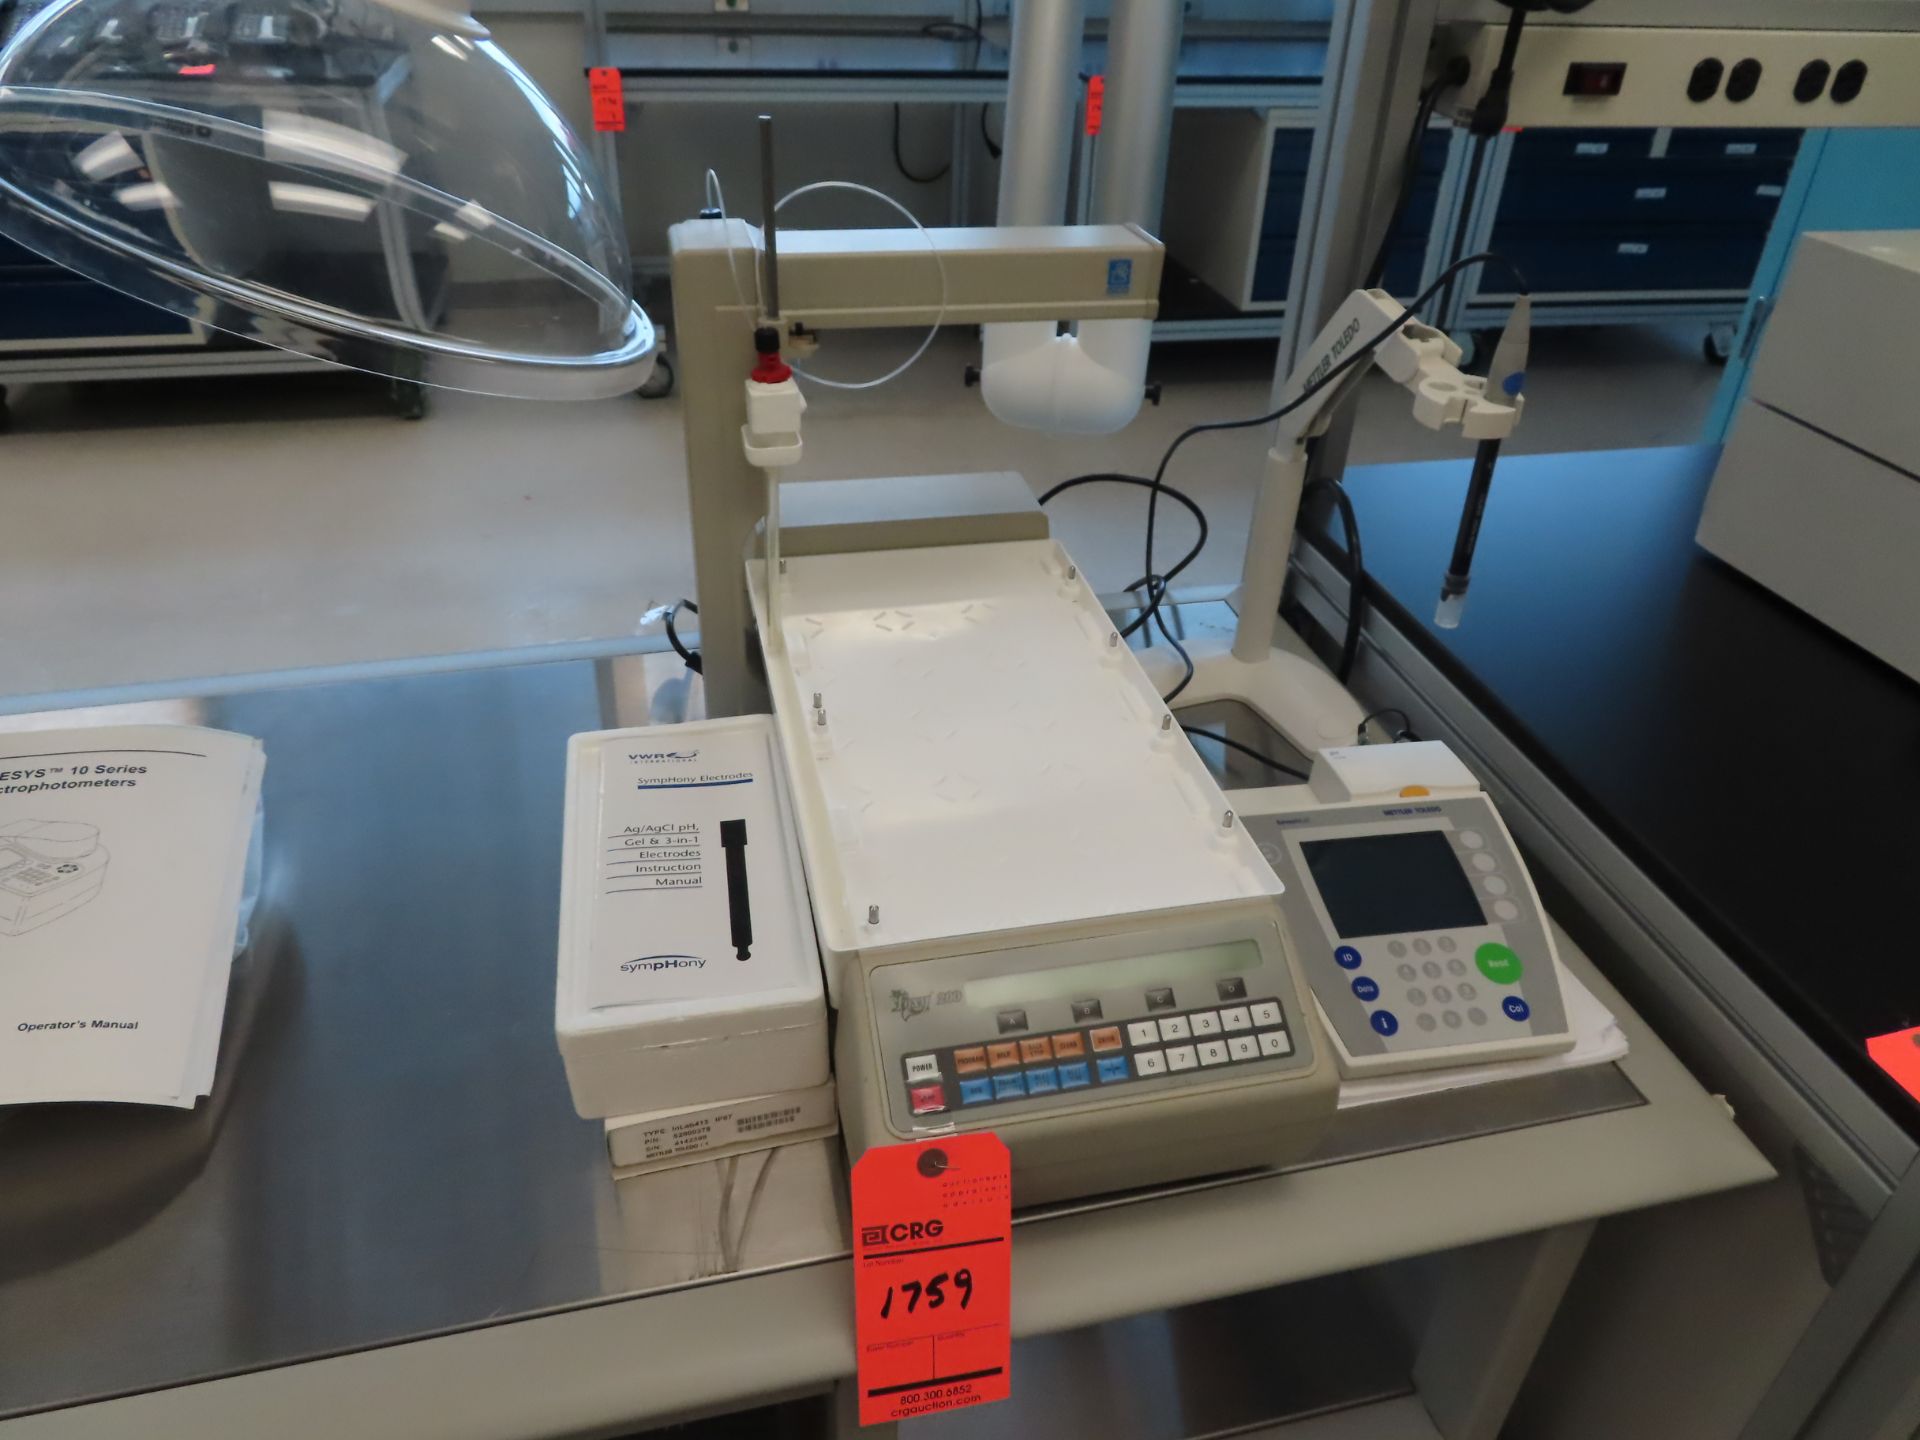 Isco Foxy 200 Combiflash fraction collector with Mettler Toledo Seven Multi PH meter, located in B